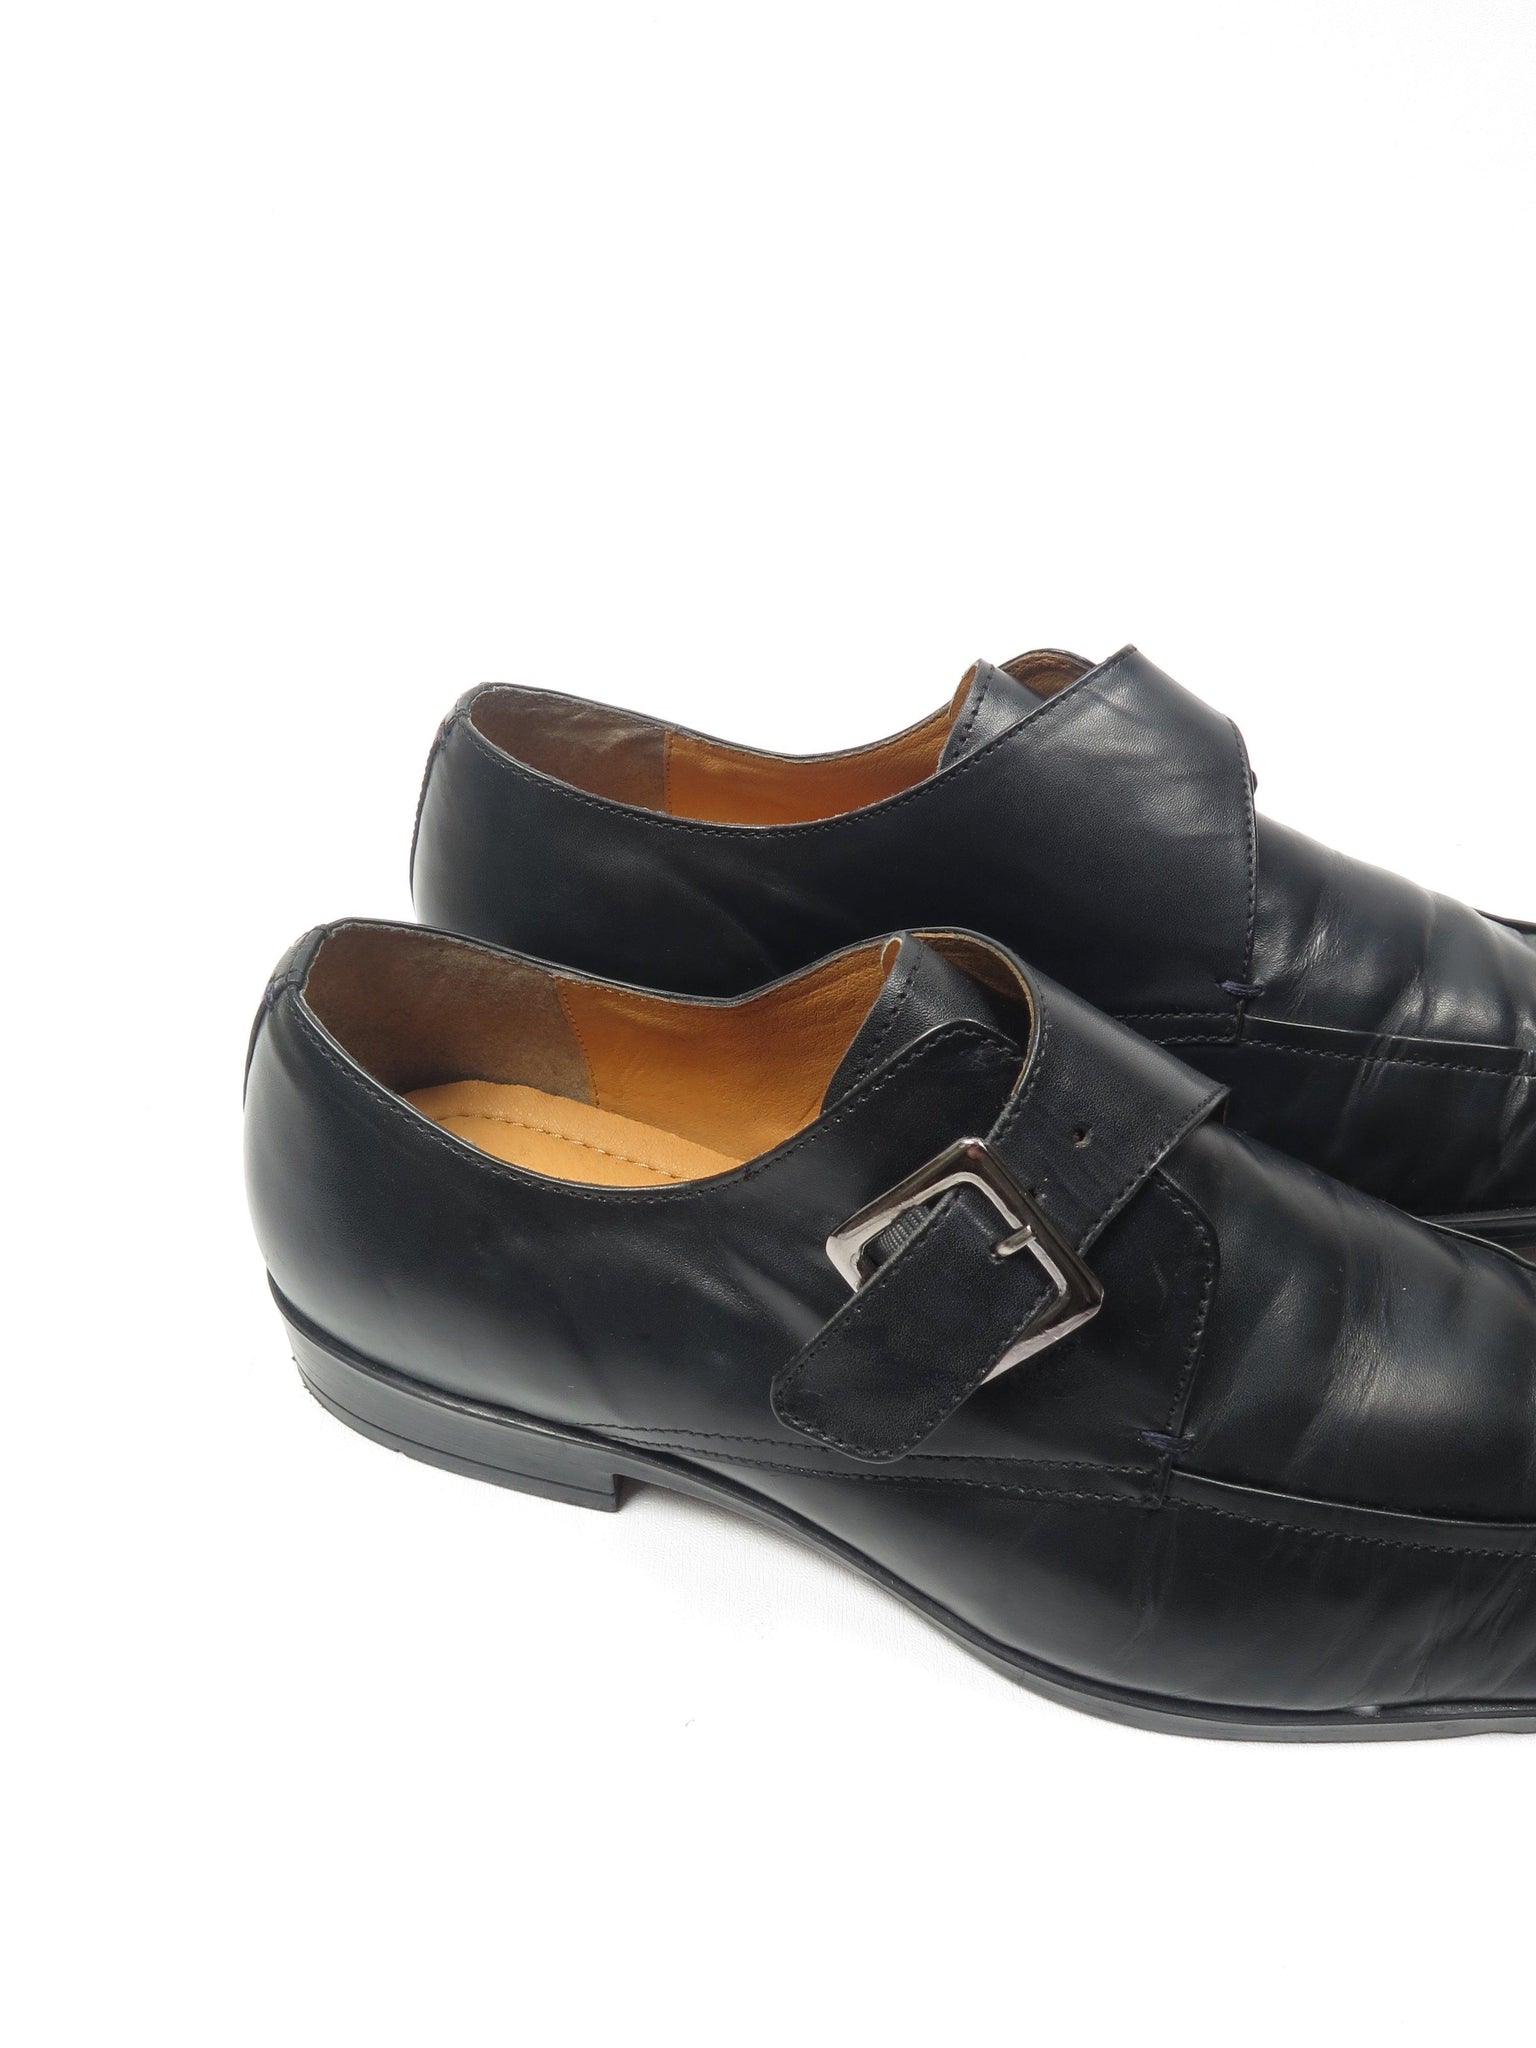 Mens Black Leather Kurt Geiger Shoes With Buckle 44 - The Harlequin